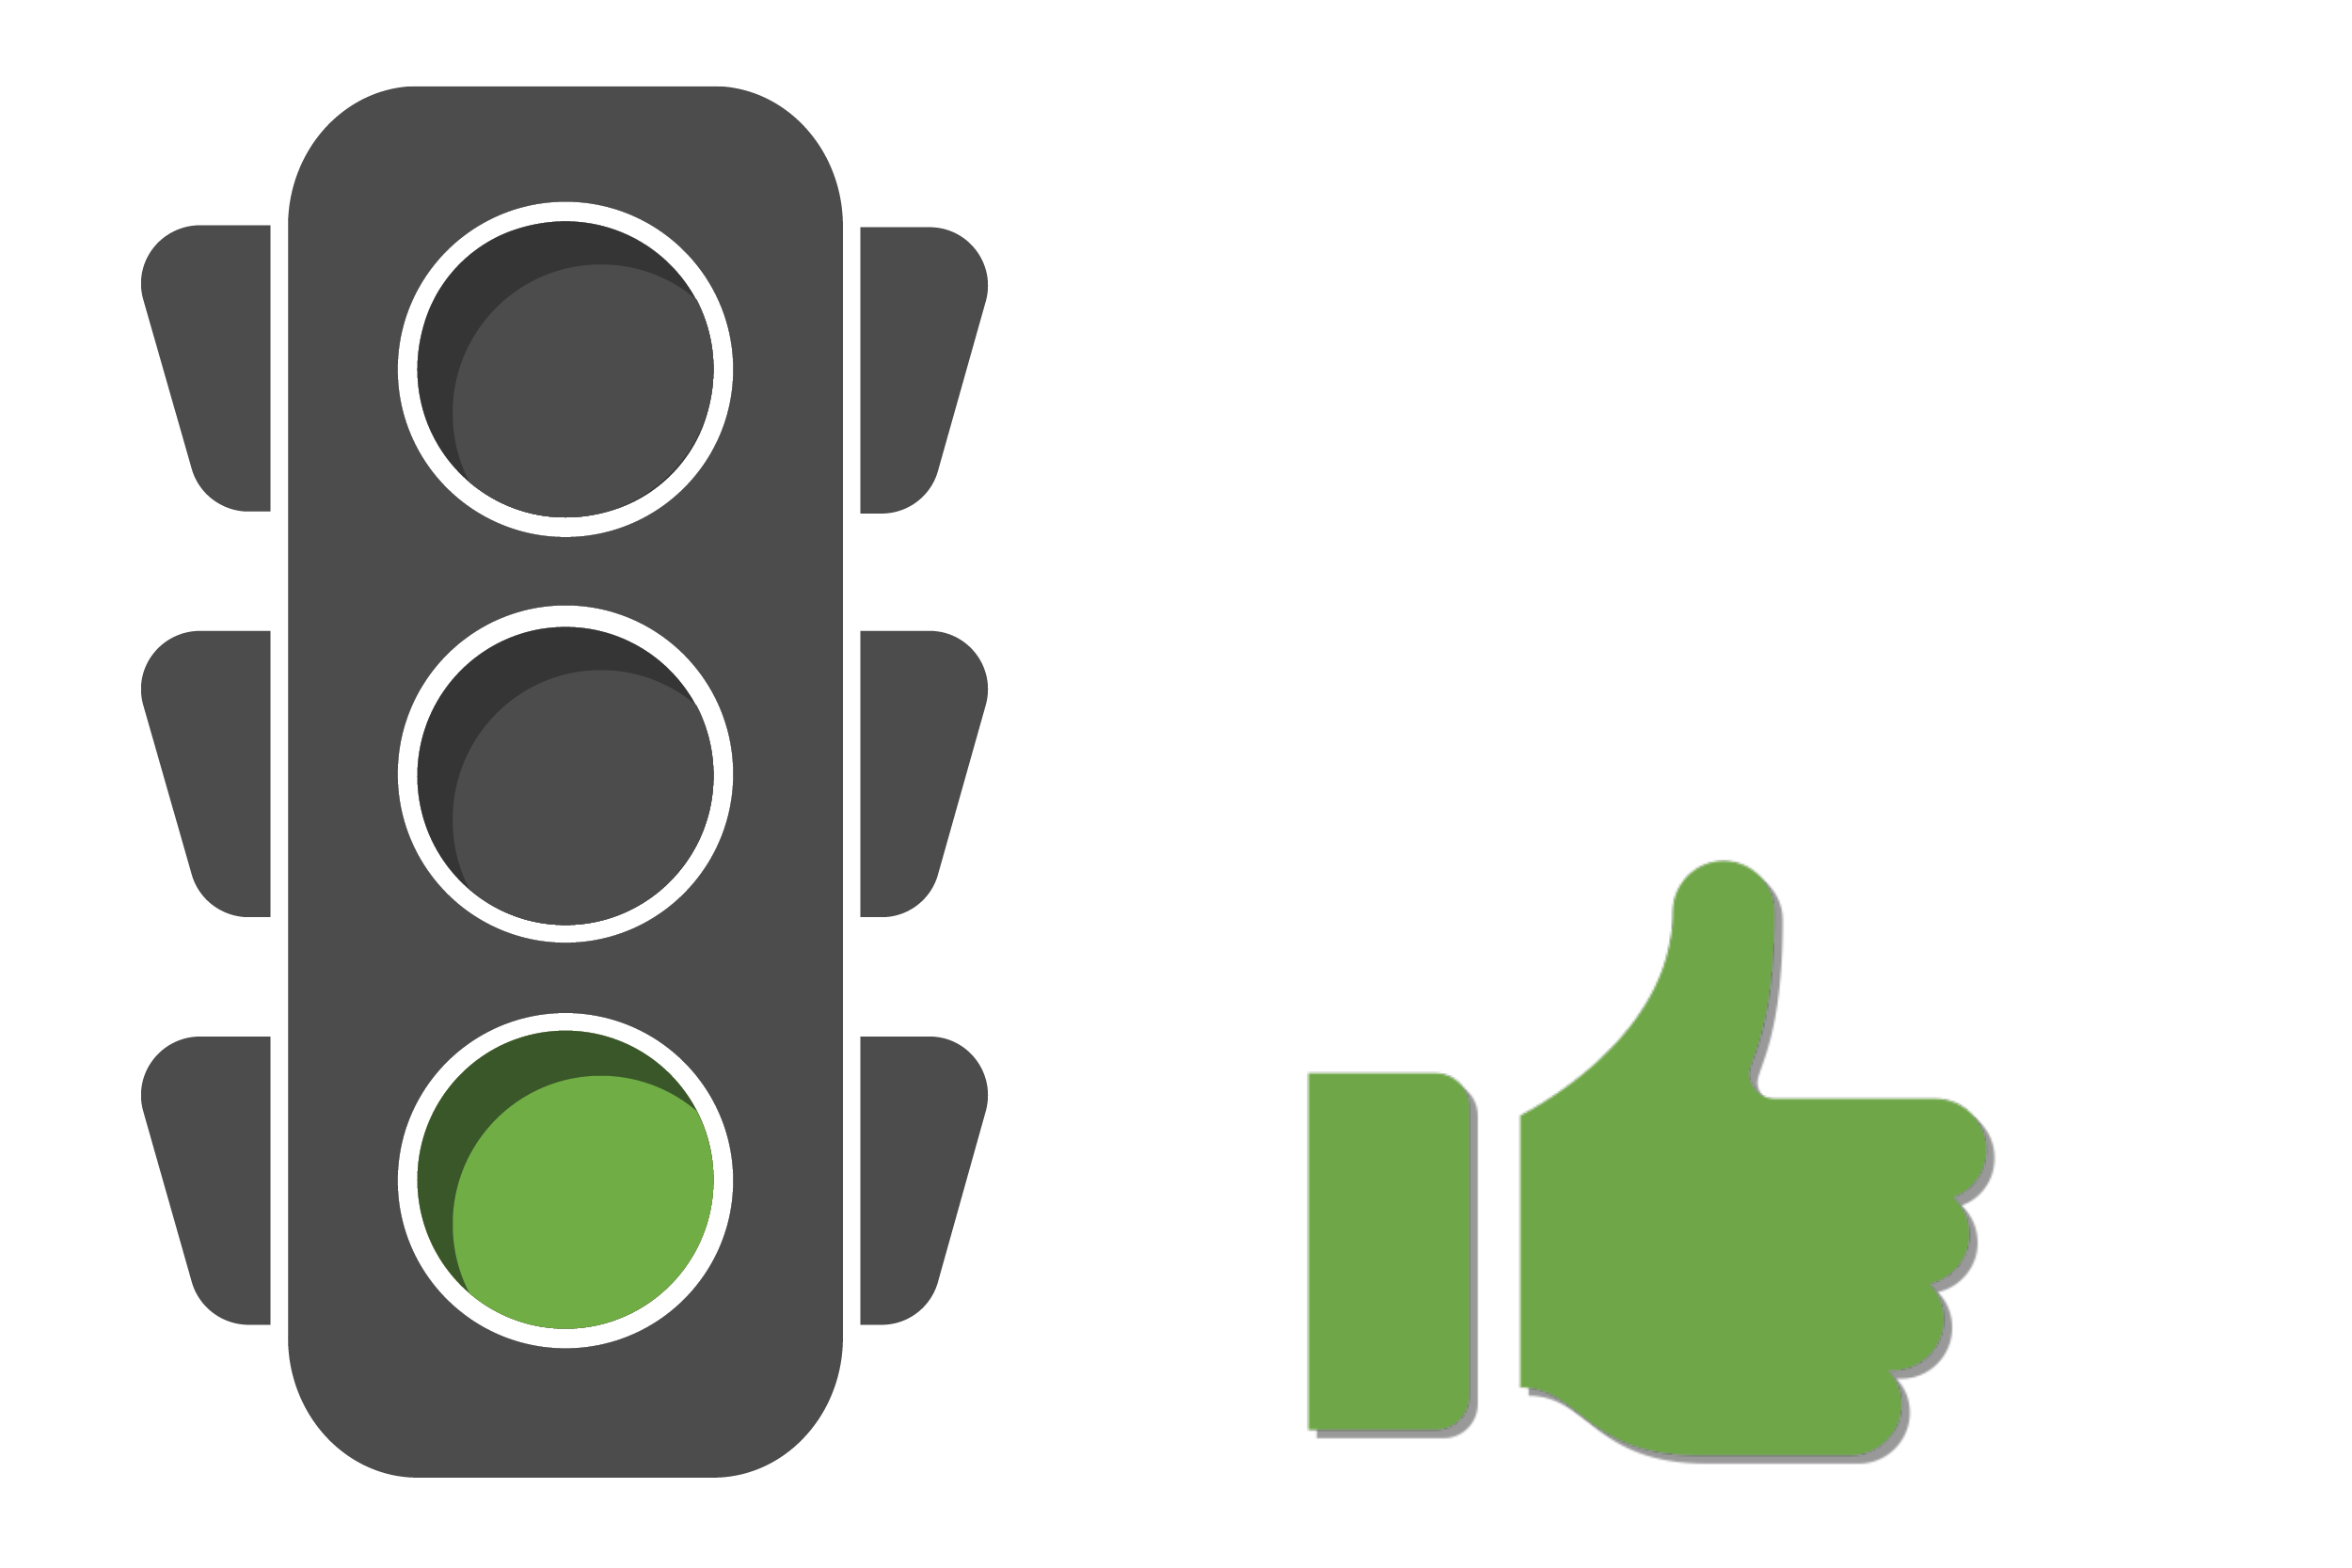 Stop light with green light and thumbs up icon